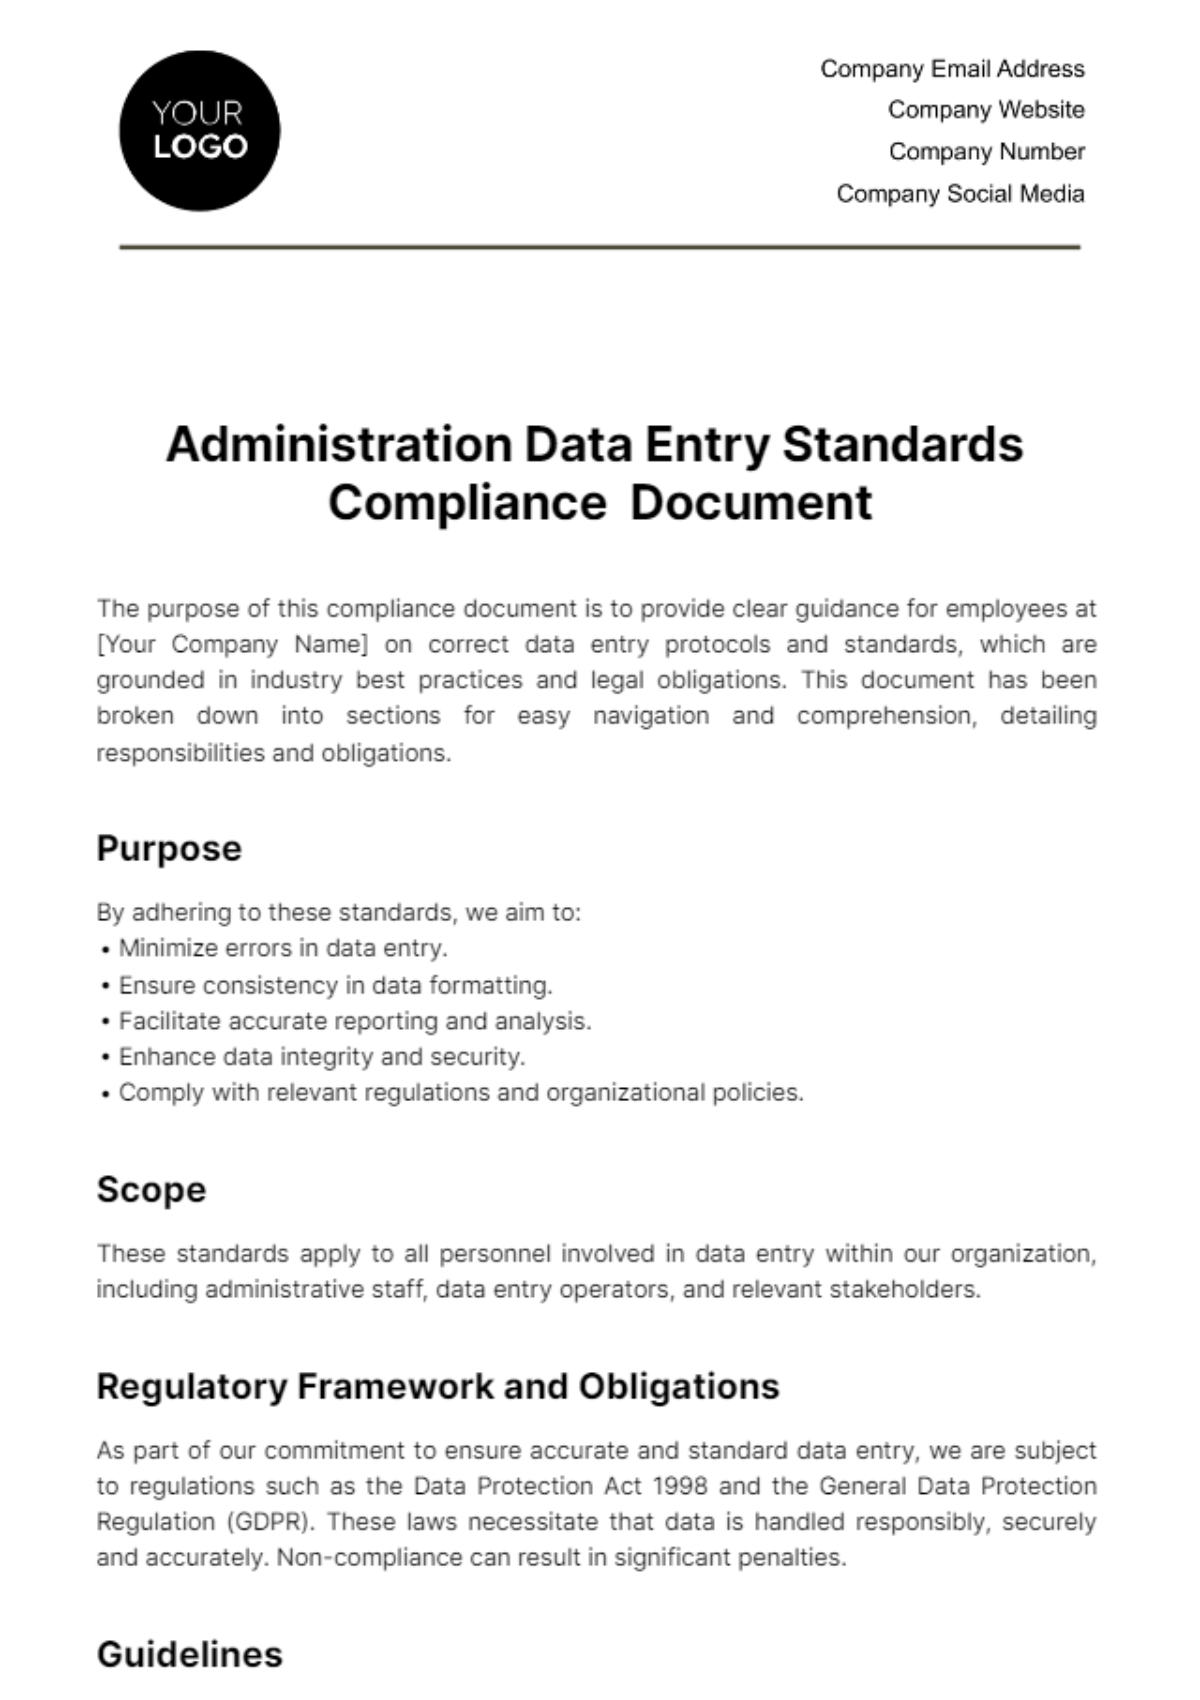 Administration Data Entry Standards Compliance Document Template